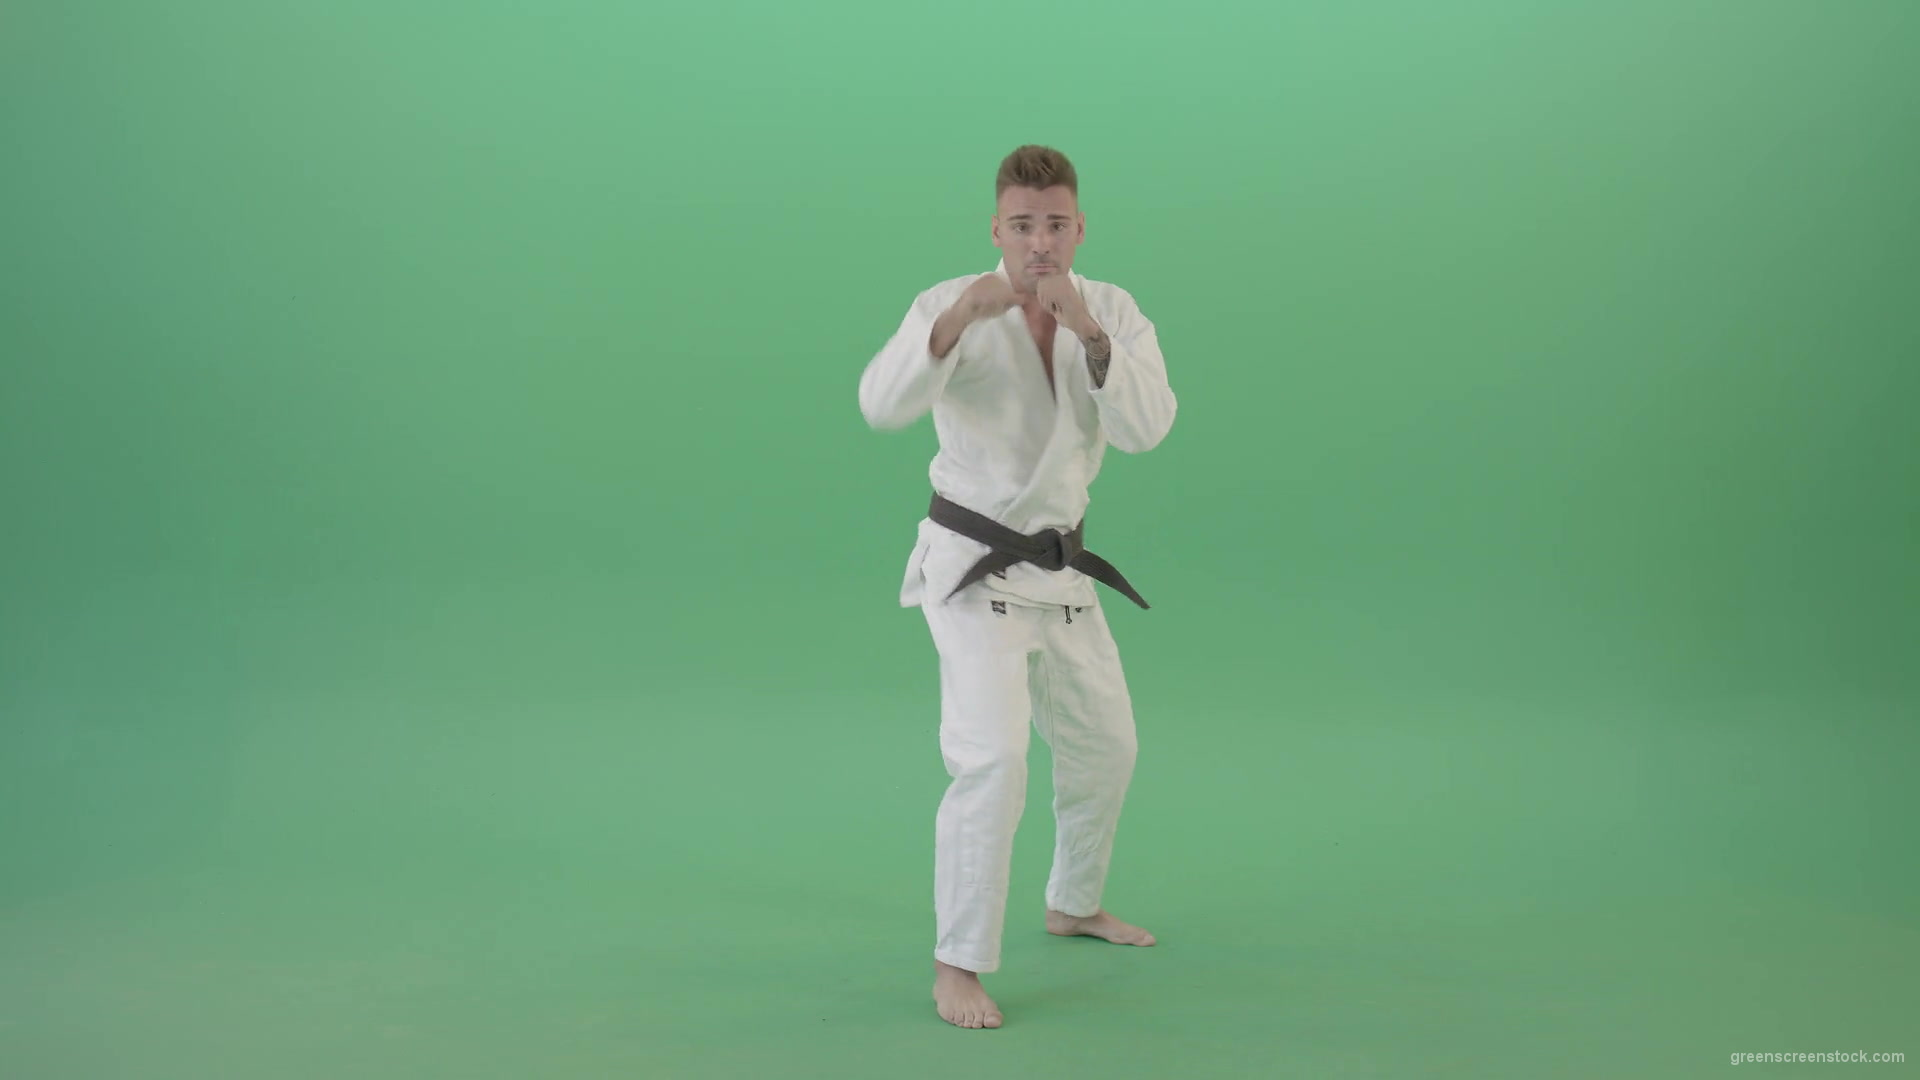 Karate-Man-boxing-making-punch-front-view-isolated-on-green-screen-1920_007 Green Screen Stock